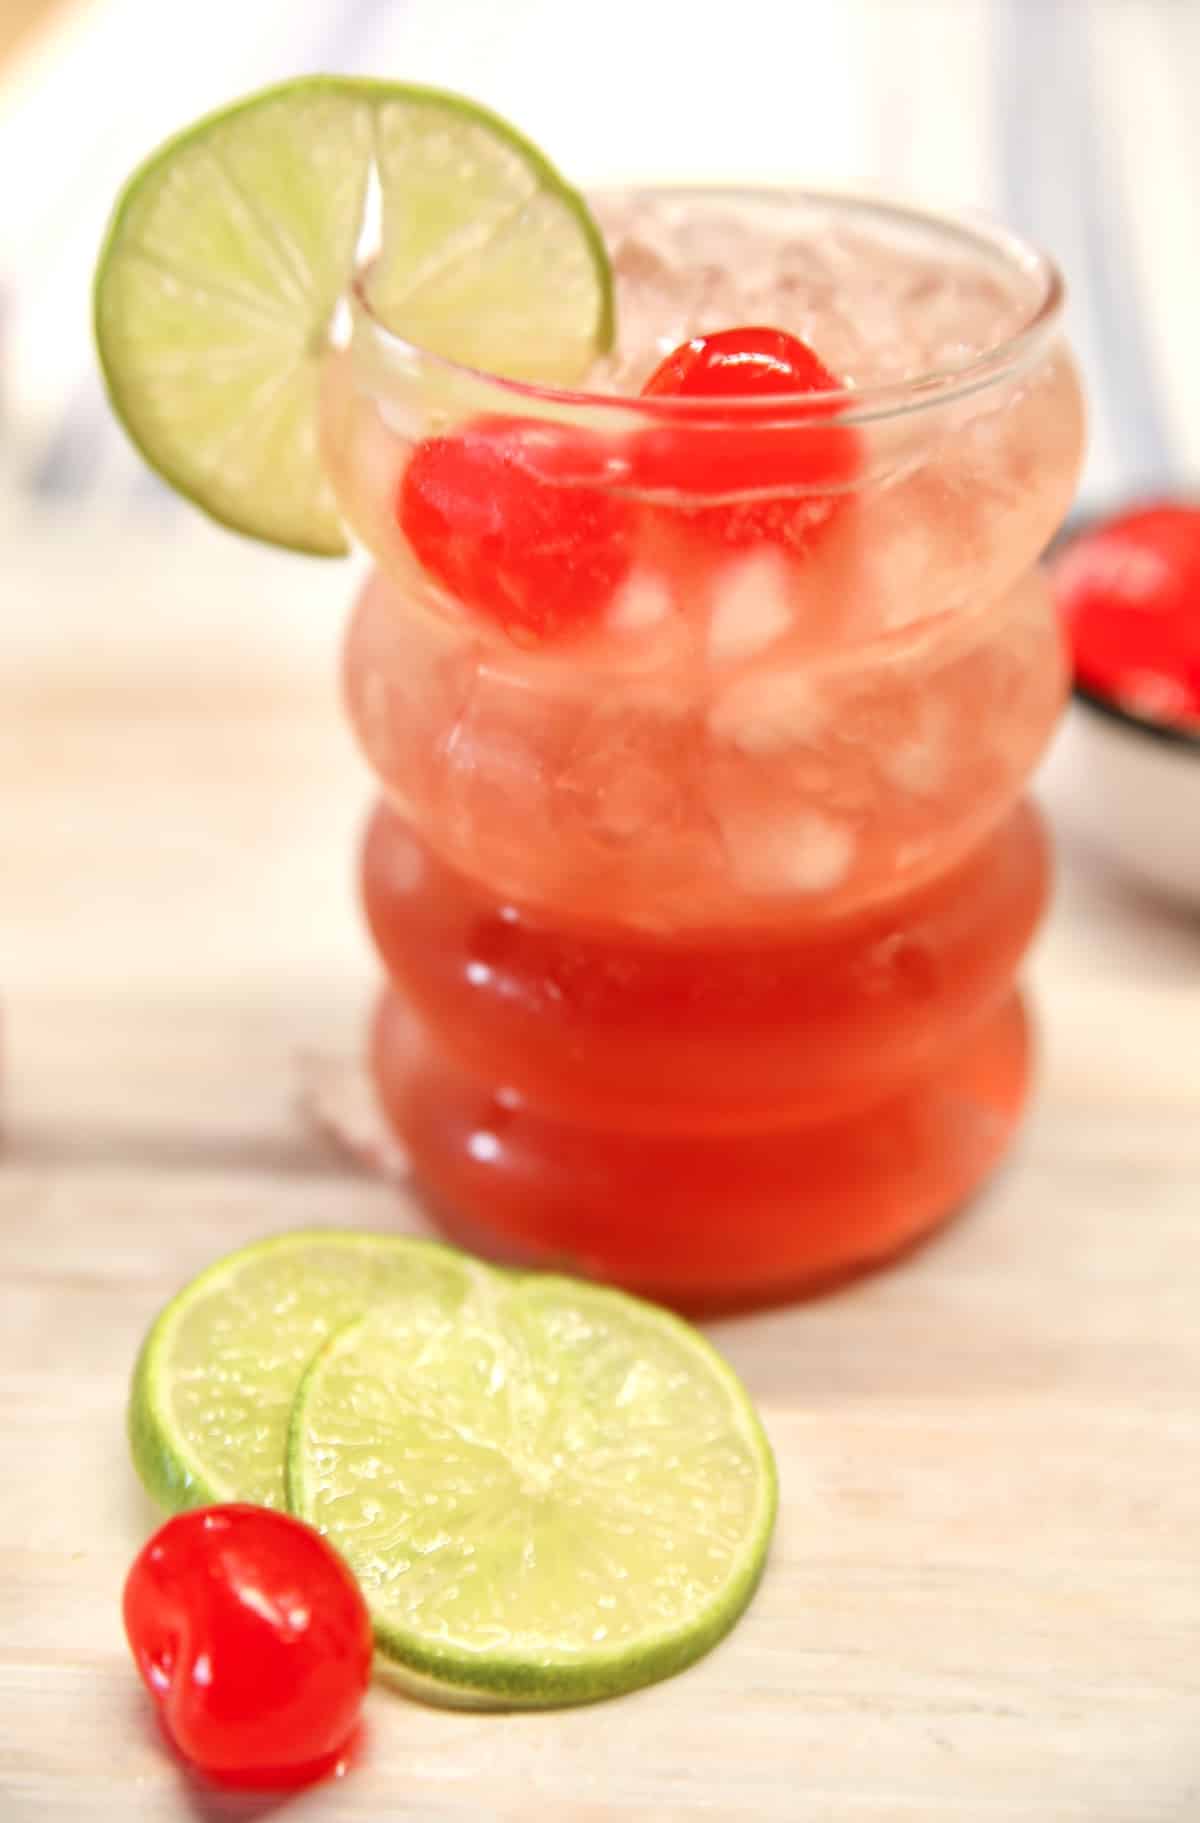 Glass with cherry limeade wine punch. Cherry and lime garnishes.